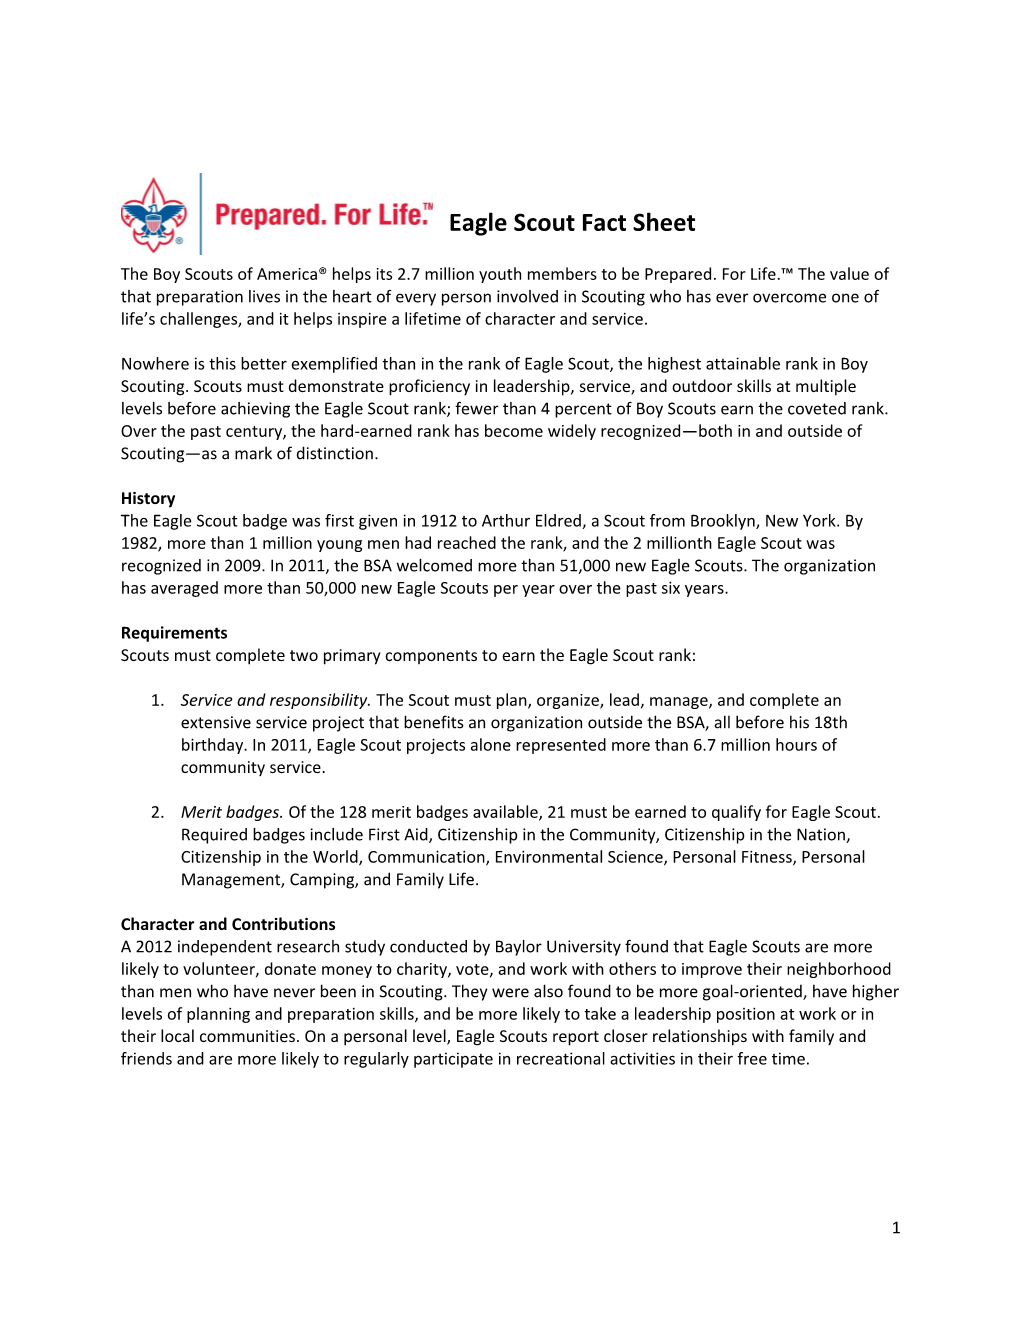 Scouts Must Complete Two Primary Components to Earn the Eagle Scout Rank